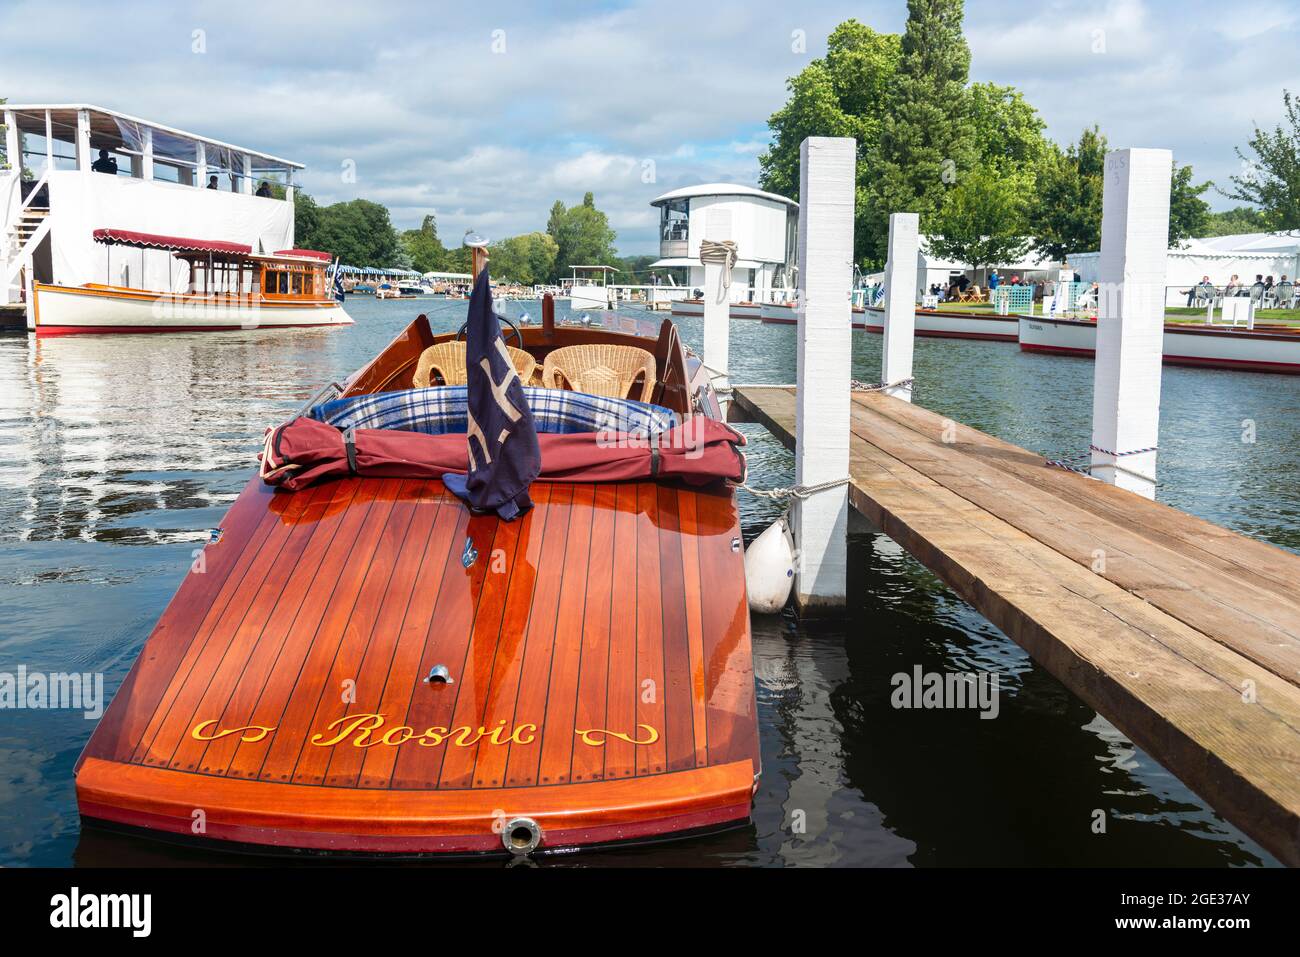 Traditional wooden slipper launch 'Rosvic' moored on a pontoon at the 2021 Henley Royal Regatta (rowing regatta) Henley-on-Thames,Oxon, England, UK Stock Photo